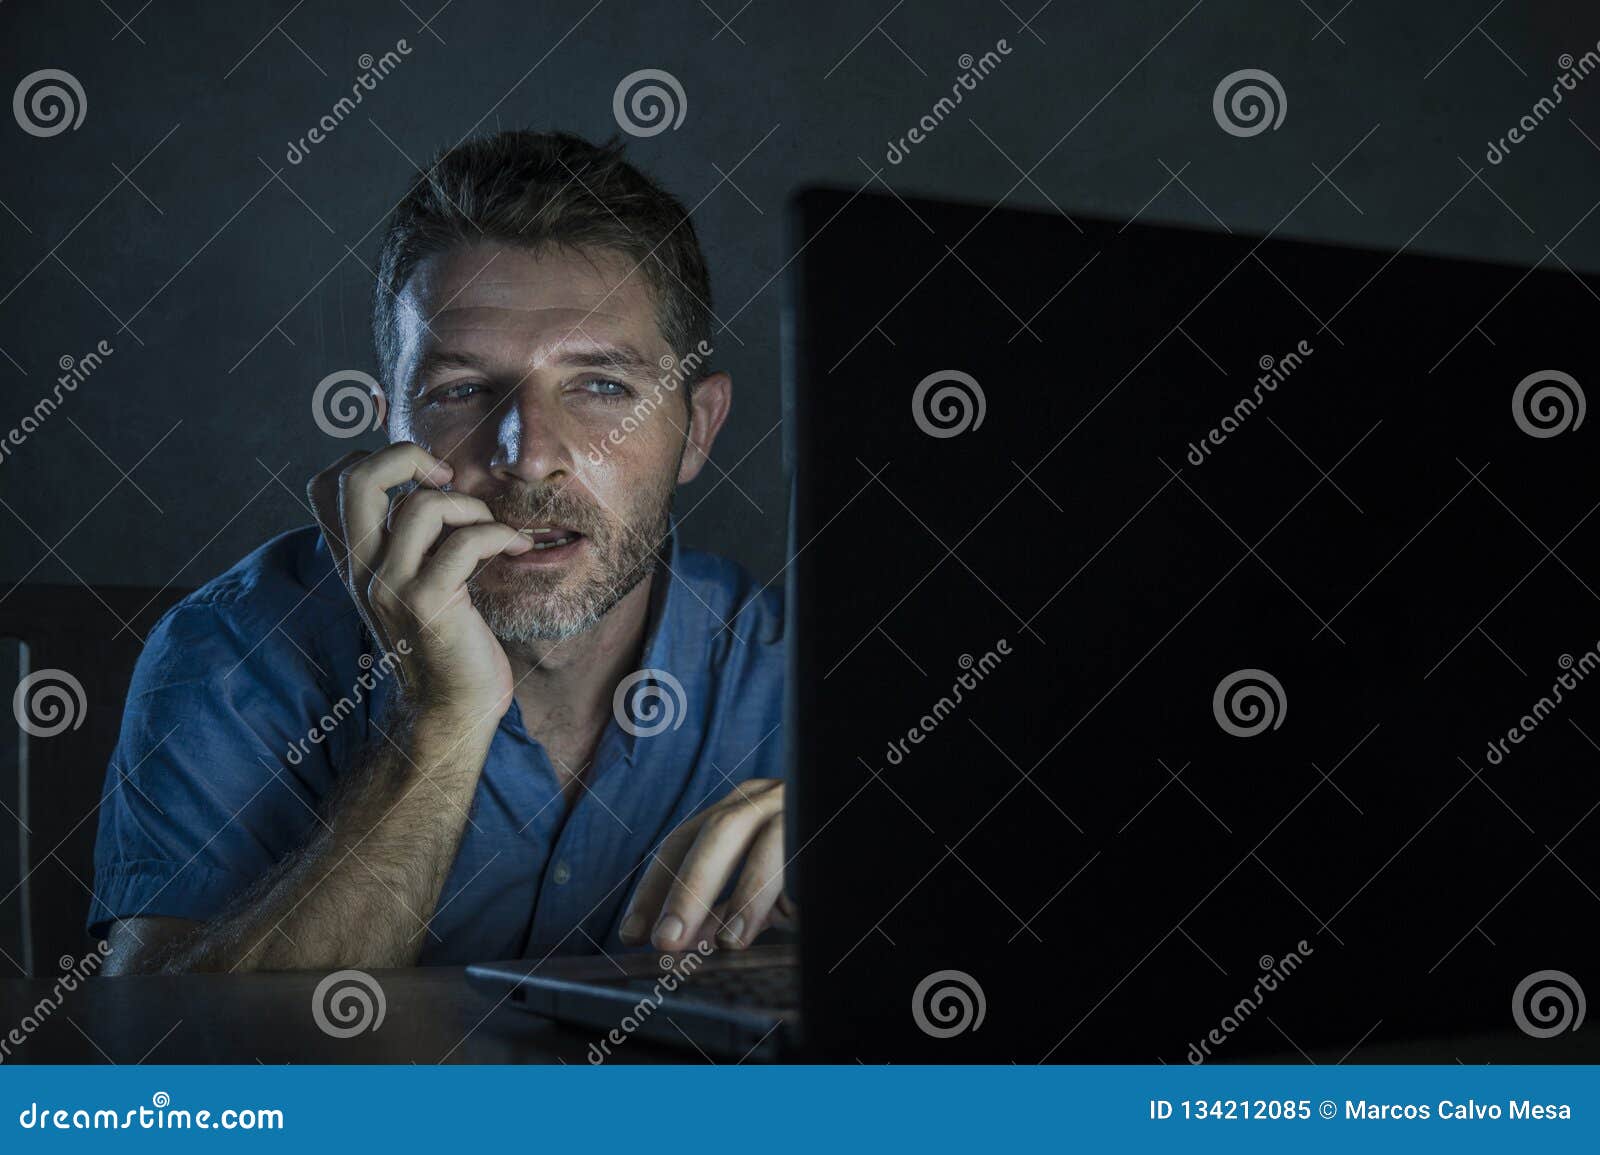 Young Aroused and Excited Sex Addict Man Watching Mobile Online in Laptop Computer Light Night at Home in Stock Image picture